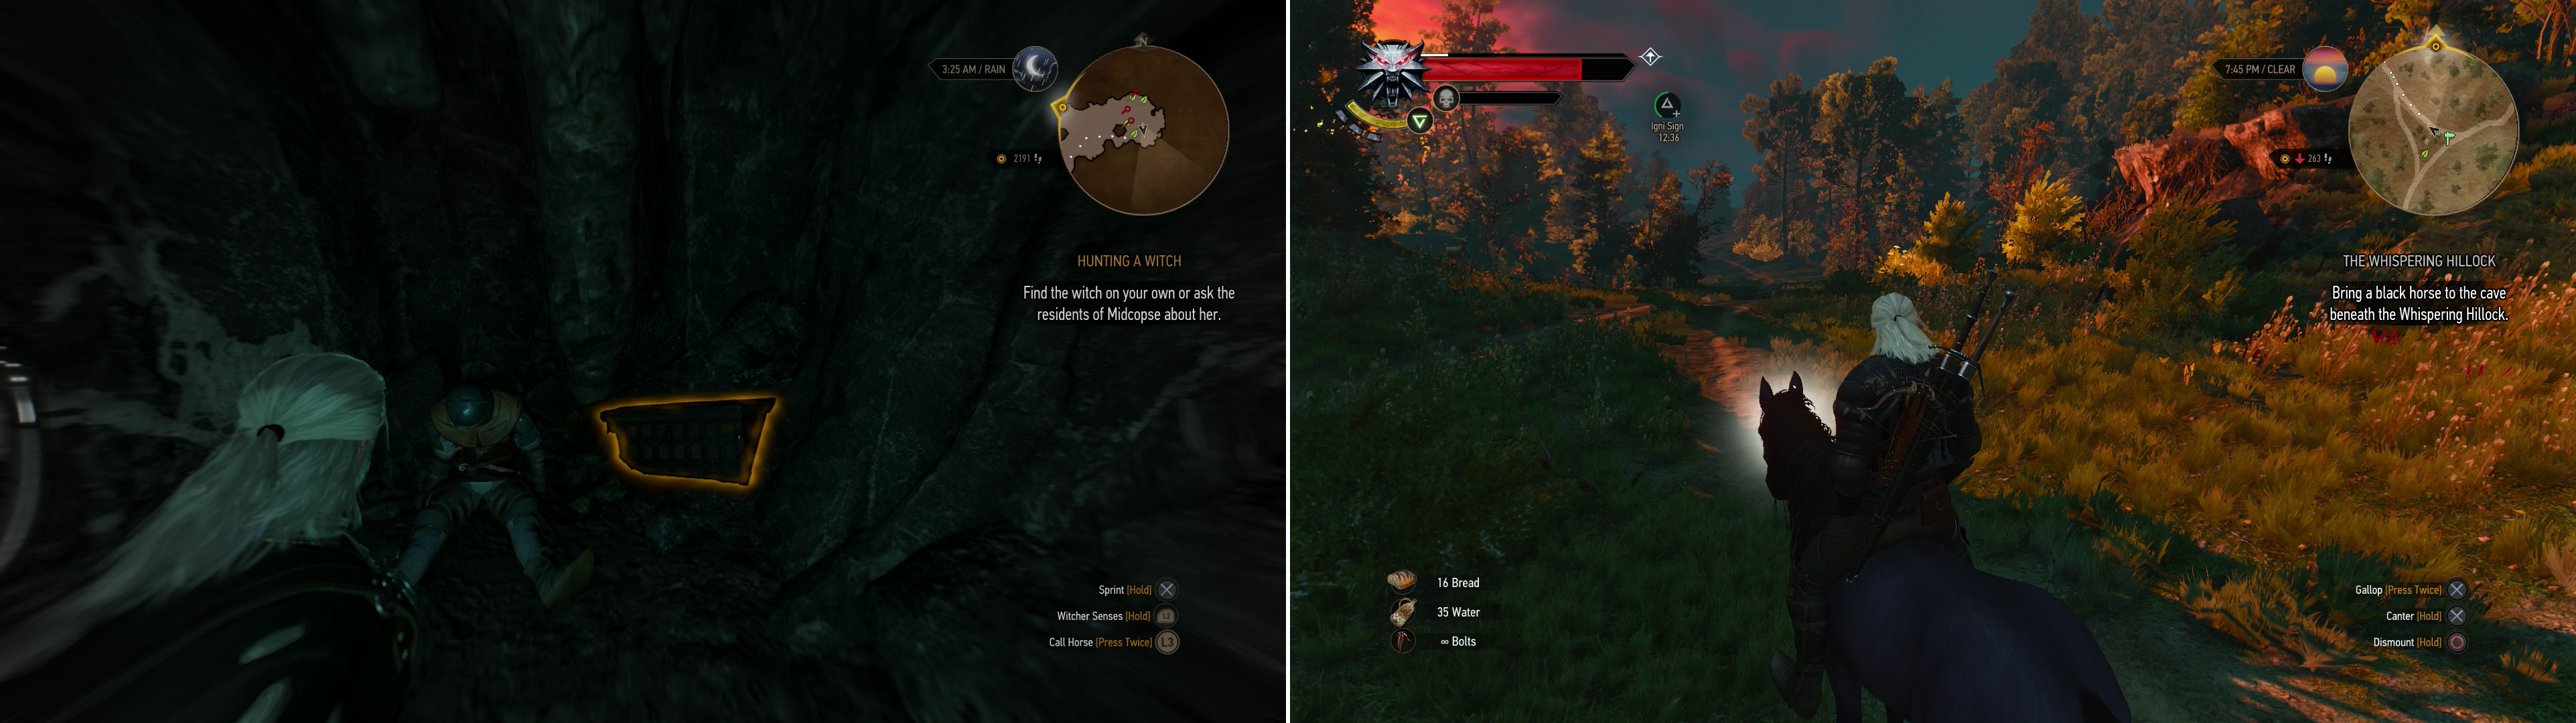 Take a detour to search a cave for a chest containing the Diagram: Enhanced Griffin Silver Sword (left). Use Axii to pacify-then mount-a mare (right).